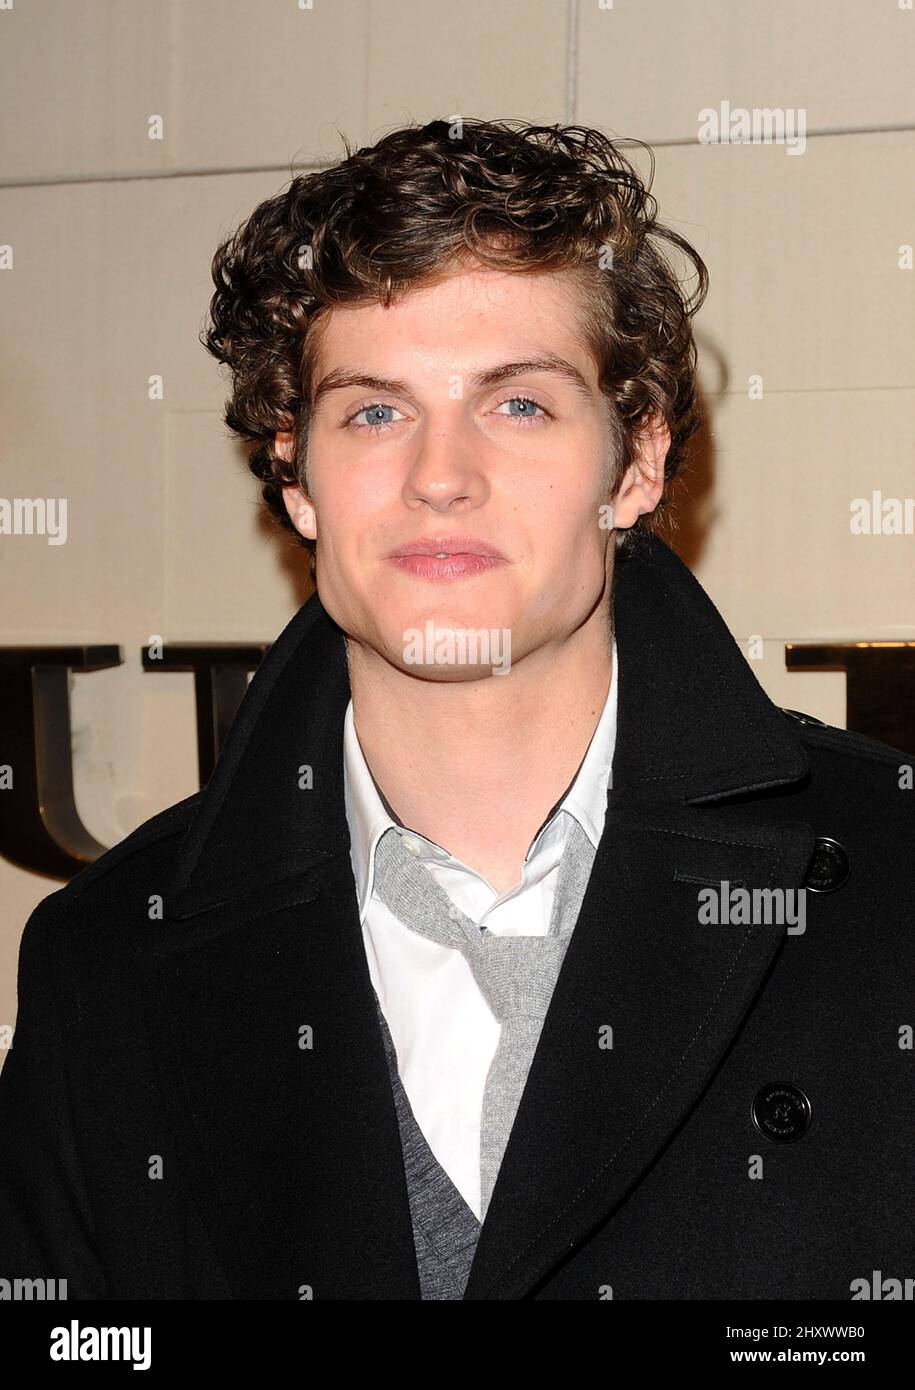 Daniel Sharman during the "Burberry Body" Burberry Fragrance Launch Party  held at Burberry, California Stock Photo - Alamy